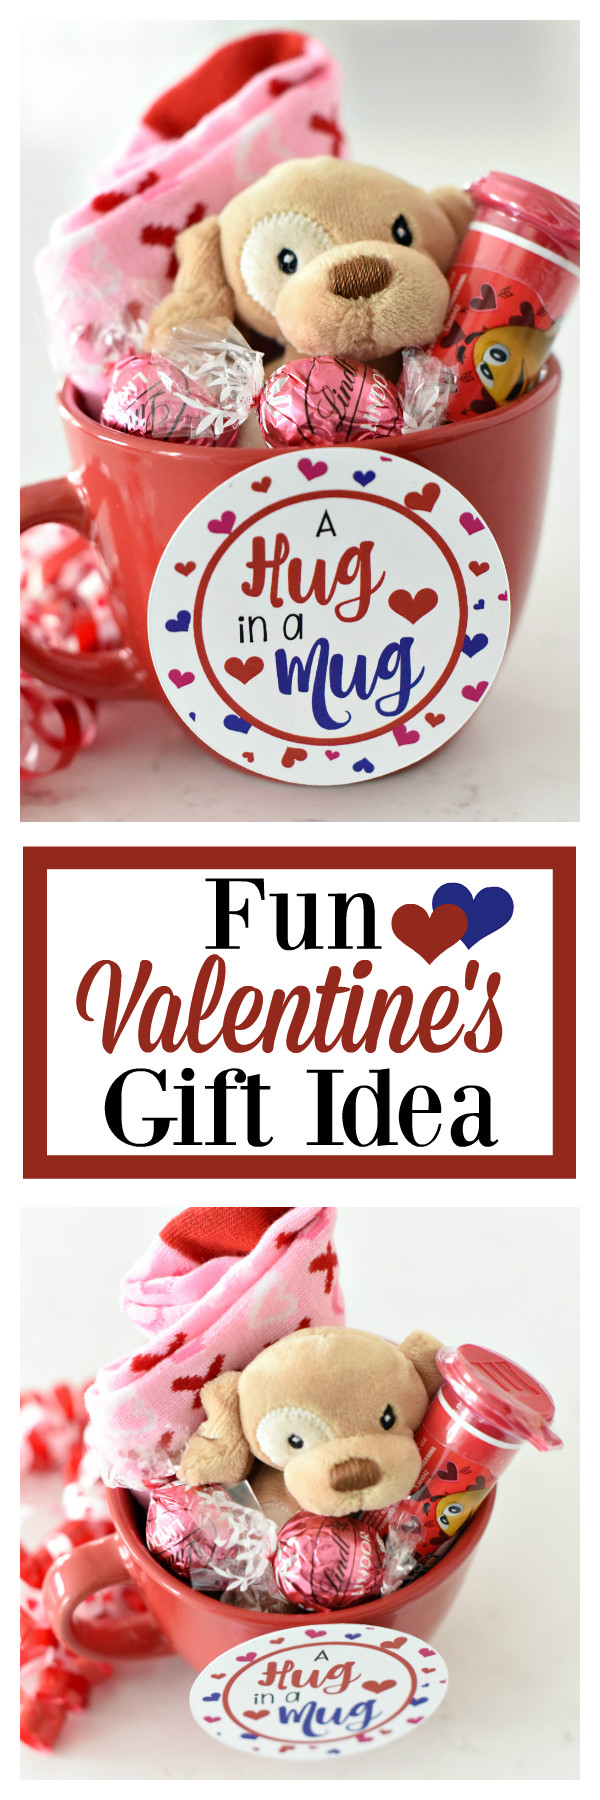 Fun Valentines Day Gifts
 Fun Valentines Gift Idea for Kids – Fun Squared